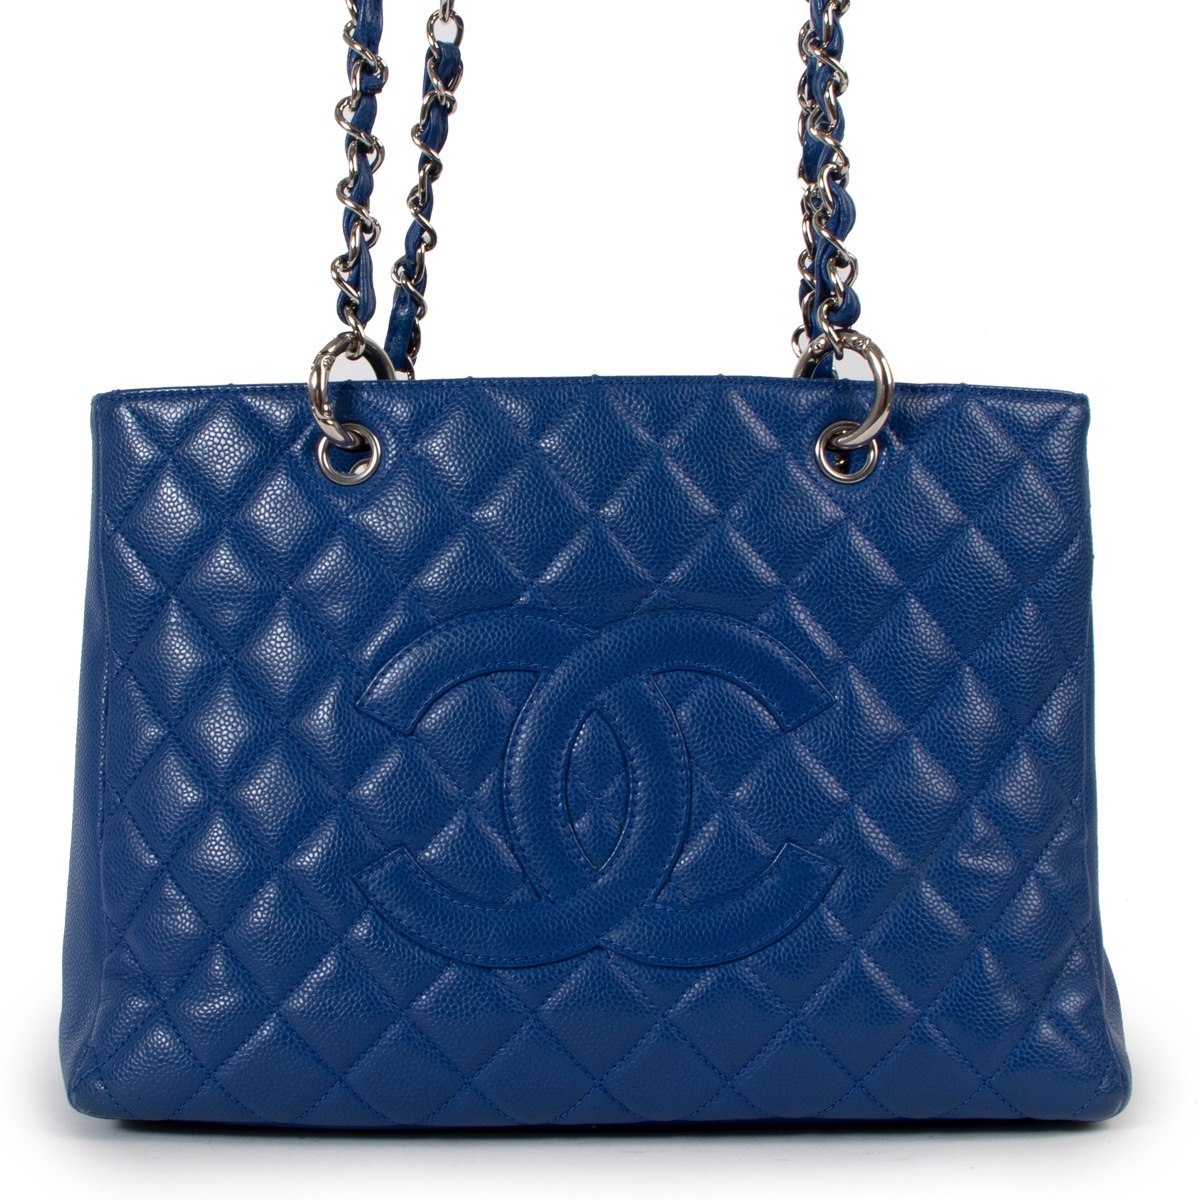 Chanel Electric Blue Caviar Leather GST Grand Shopping Tote Bag